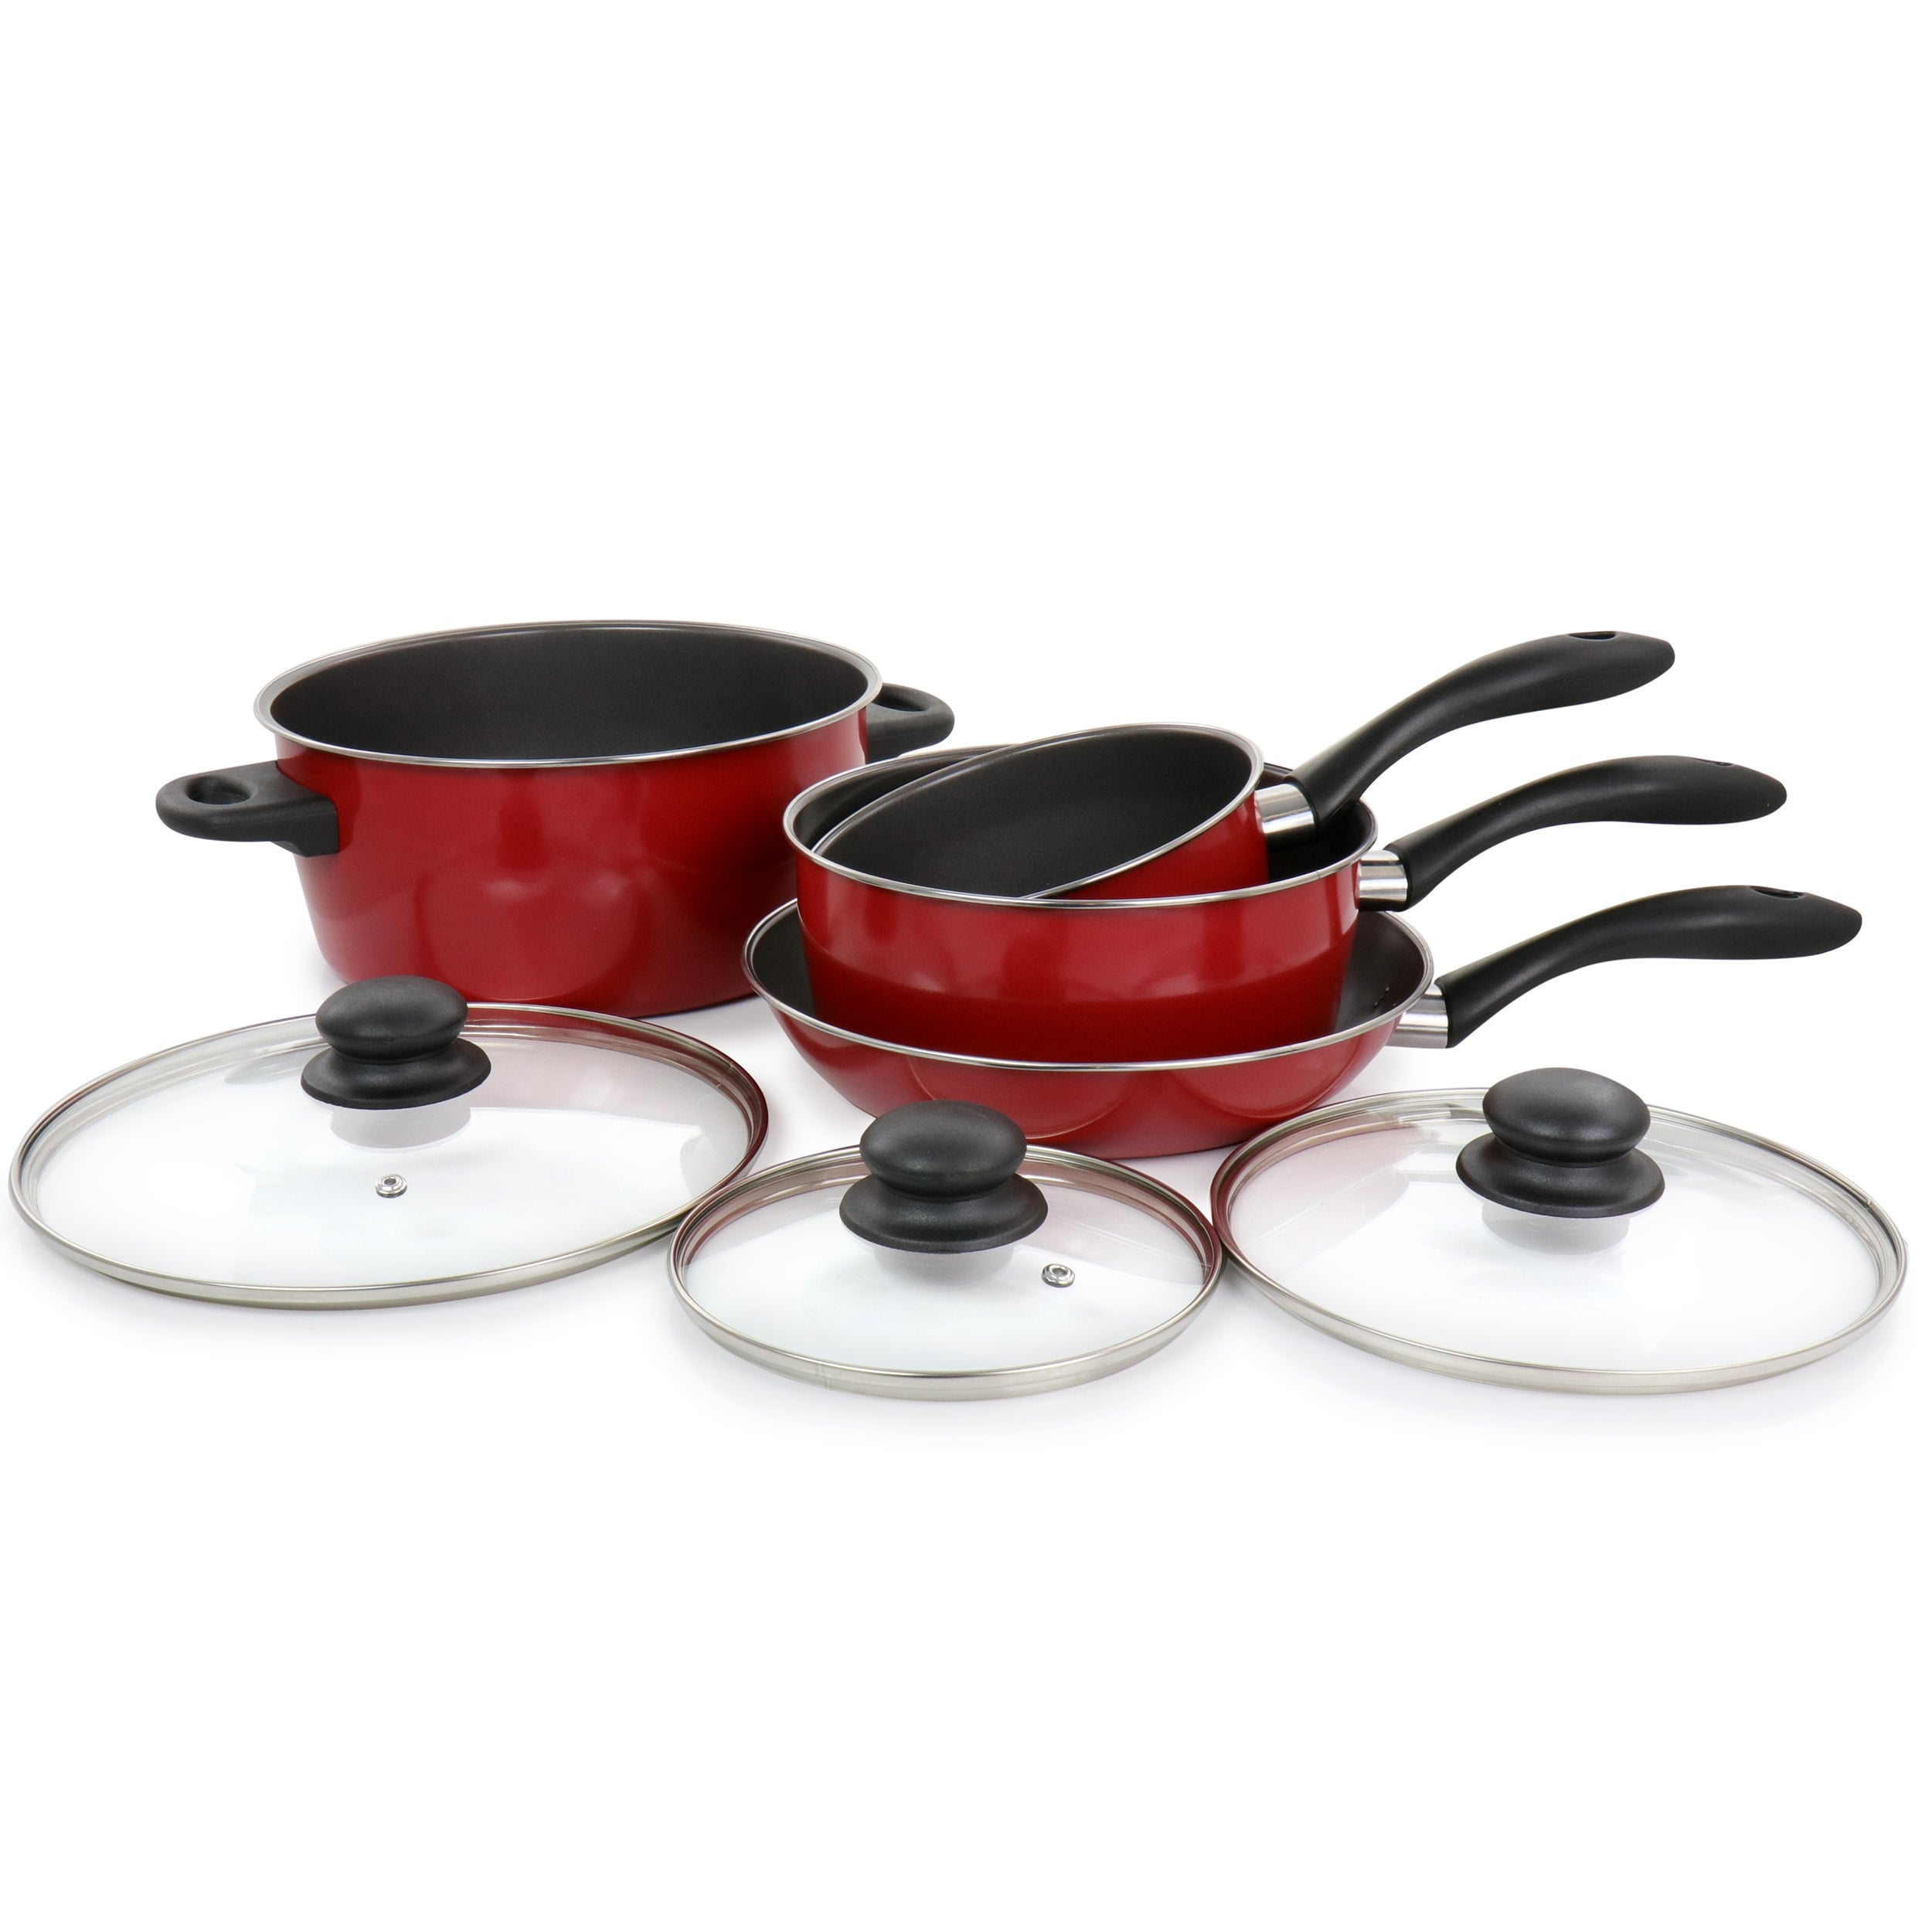 https://ak1.ostkcdn.com/images/products/is/images/direct/21197f46e70cfaae997d2ce06aa8f1e589819965/Gibson-Home-Armada-7-Piece-Nonstick-Carbon-Steel-Cookware-Set-in-Red.jpg